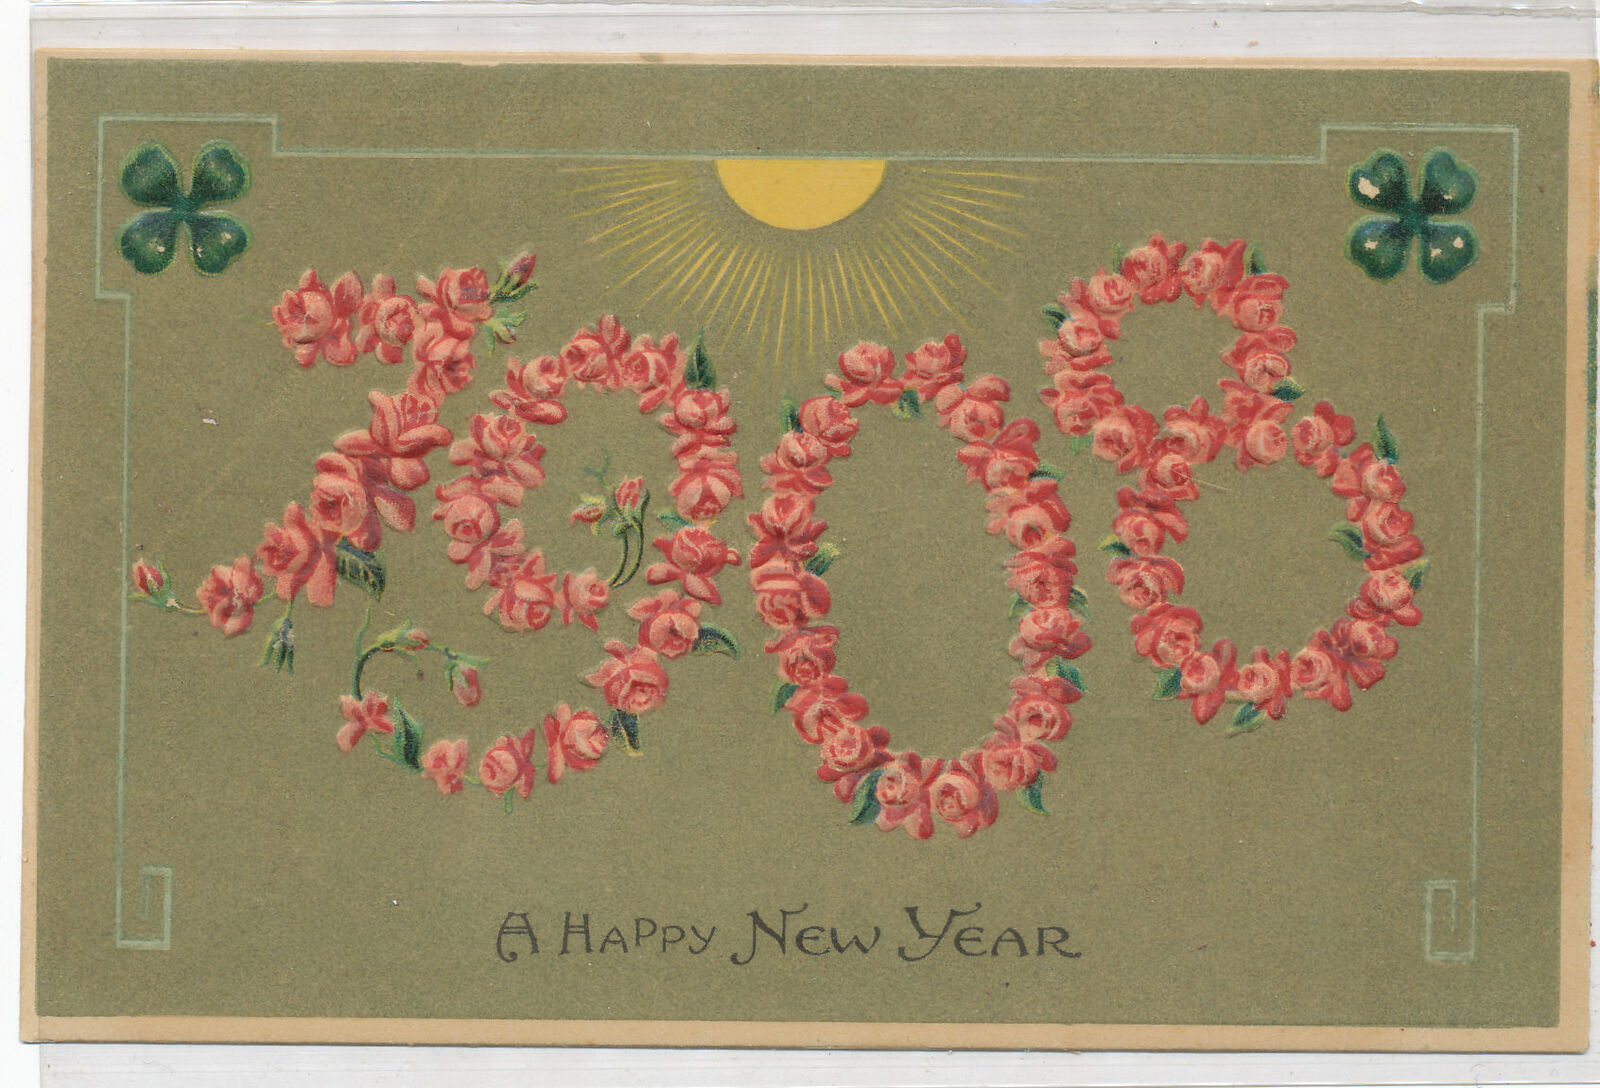 RFD #1 cancel on 1908 NEW YEAR LARGE DATE postcard